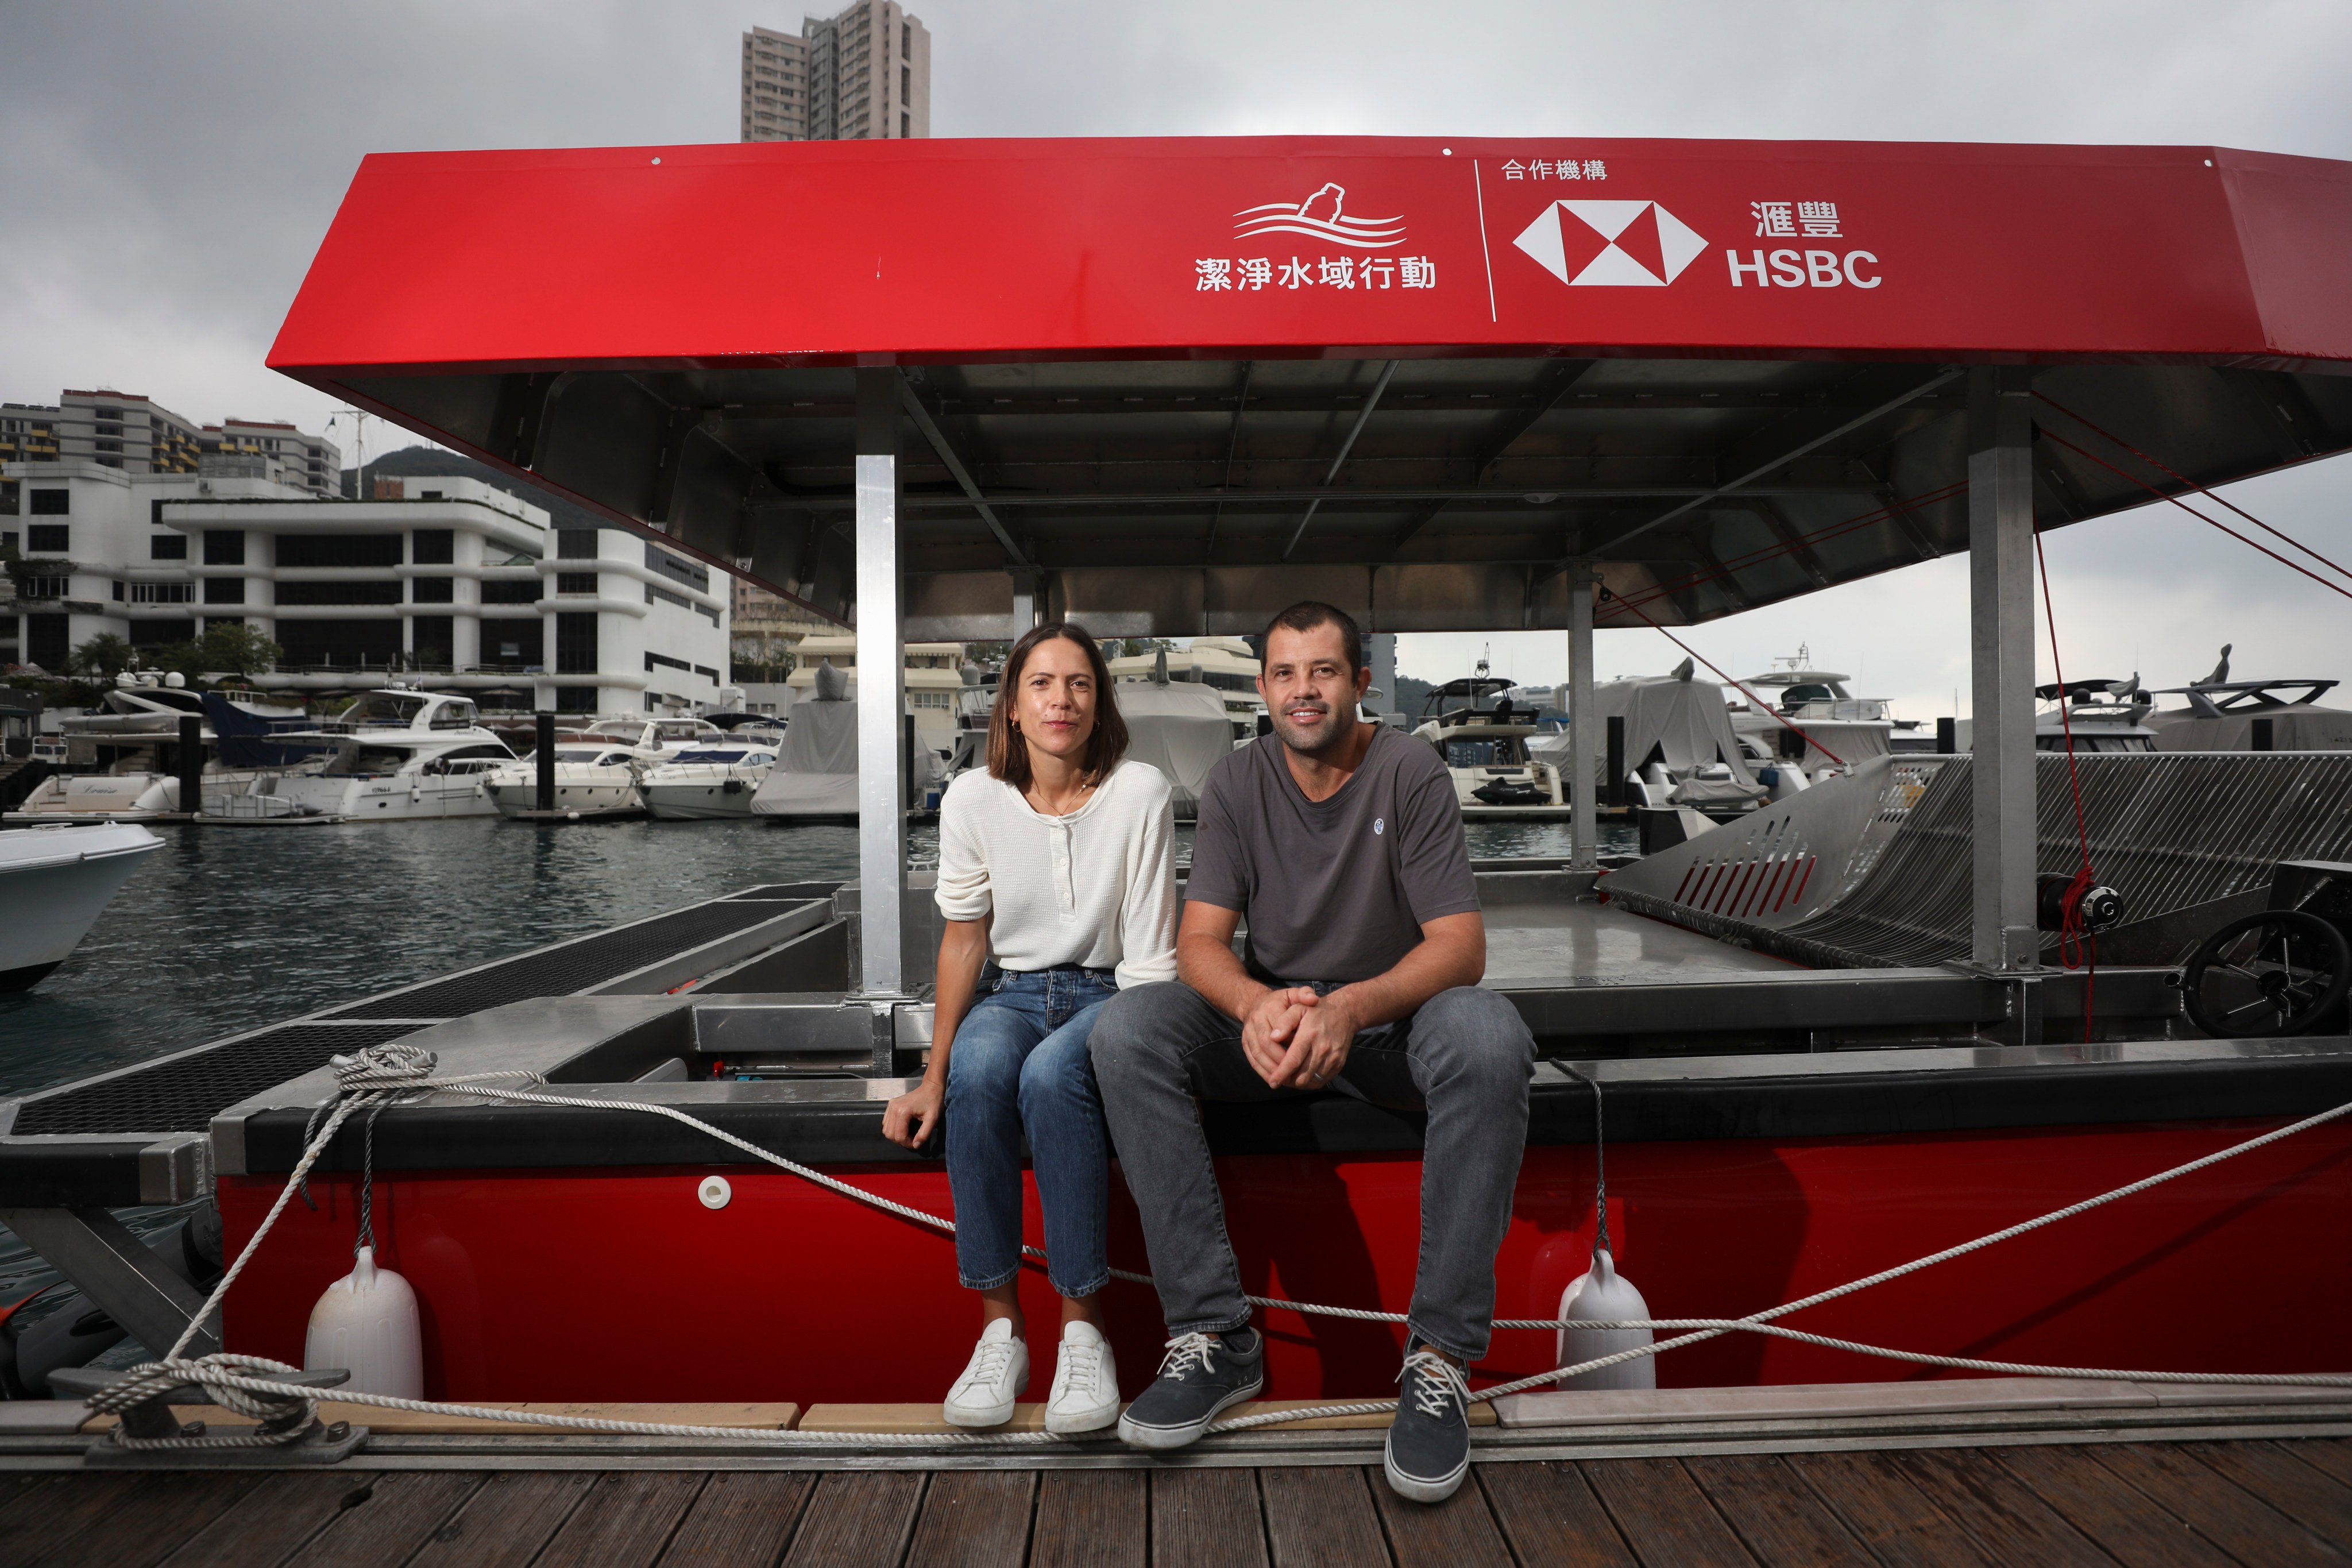 Ellen Ogren and Angus Harris, founders of the Clean Waterways Initiative that aims to remove plastic waste from the city’s polluted waters using zero-emission, solar-powered boats, seen here at the Aberdeen Marina Club, Hong Kong, on December 11, 2020. Photo: Xiaomei Chen